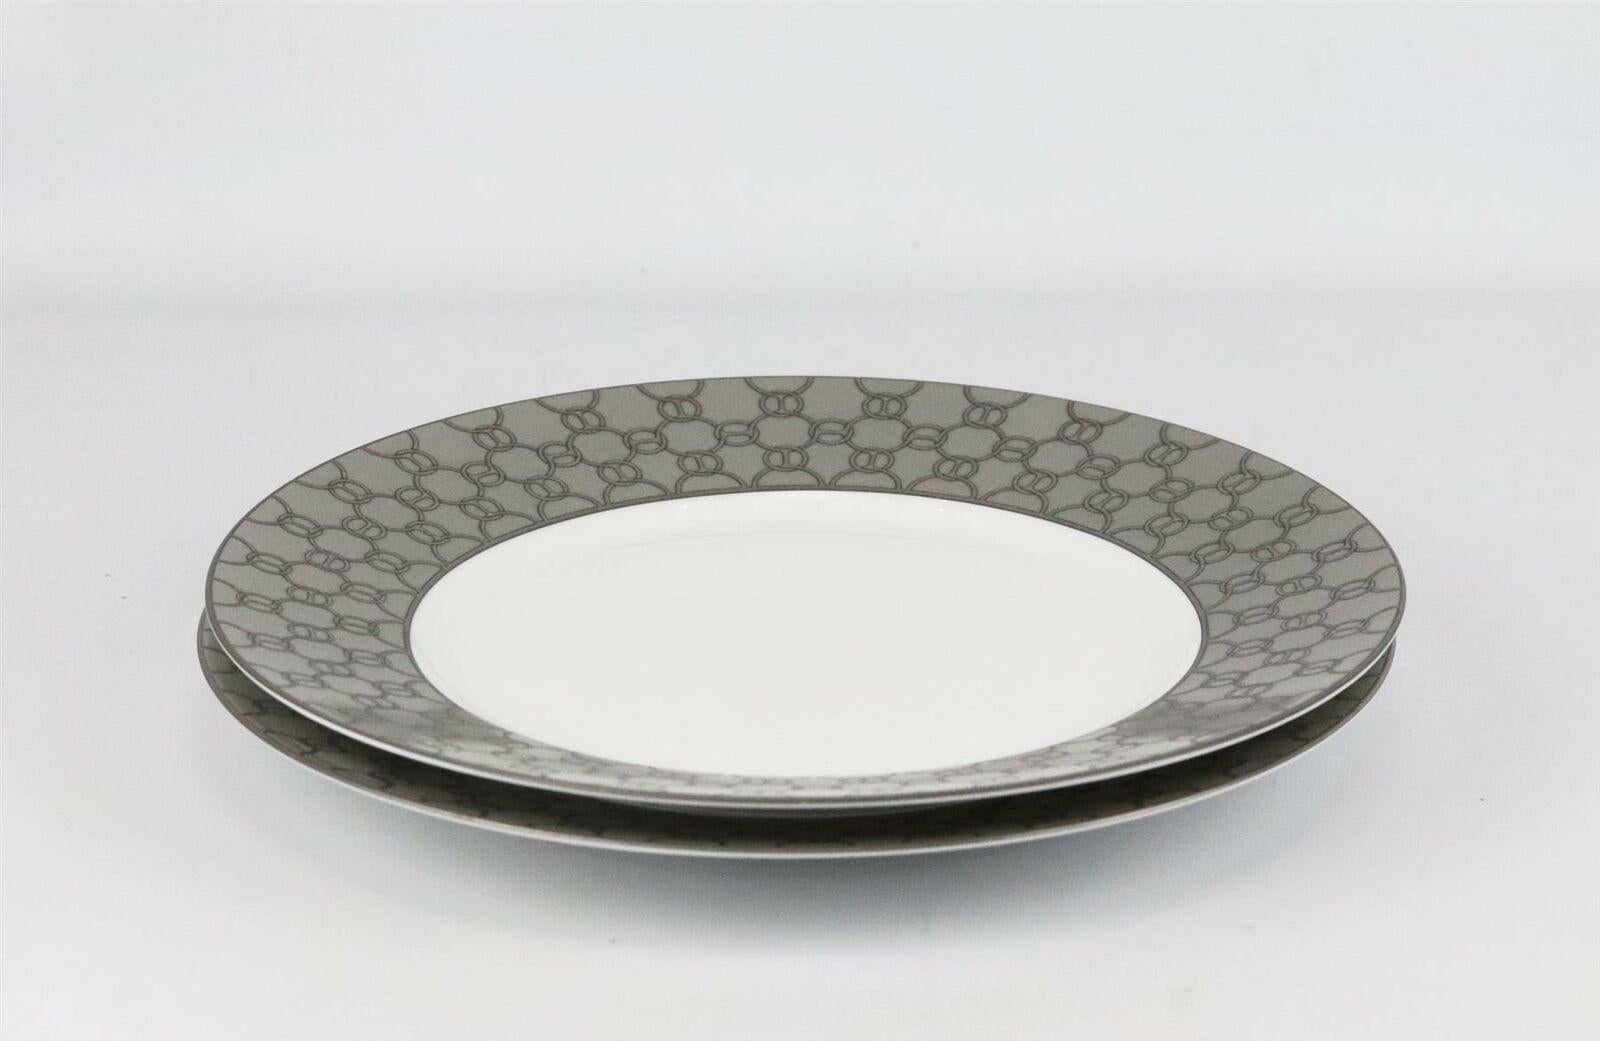 Set of 5 grey, silver and white porcelain Hermès Fil d’Argent dinner plates with chain-link design throughout, gilt accents and brand stamp on the bottom.
Does not come with box.

Dimensions: D 10.8 inches

Condition: Used. Very good conditon -